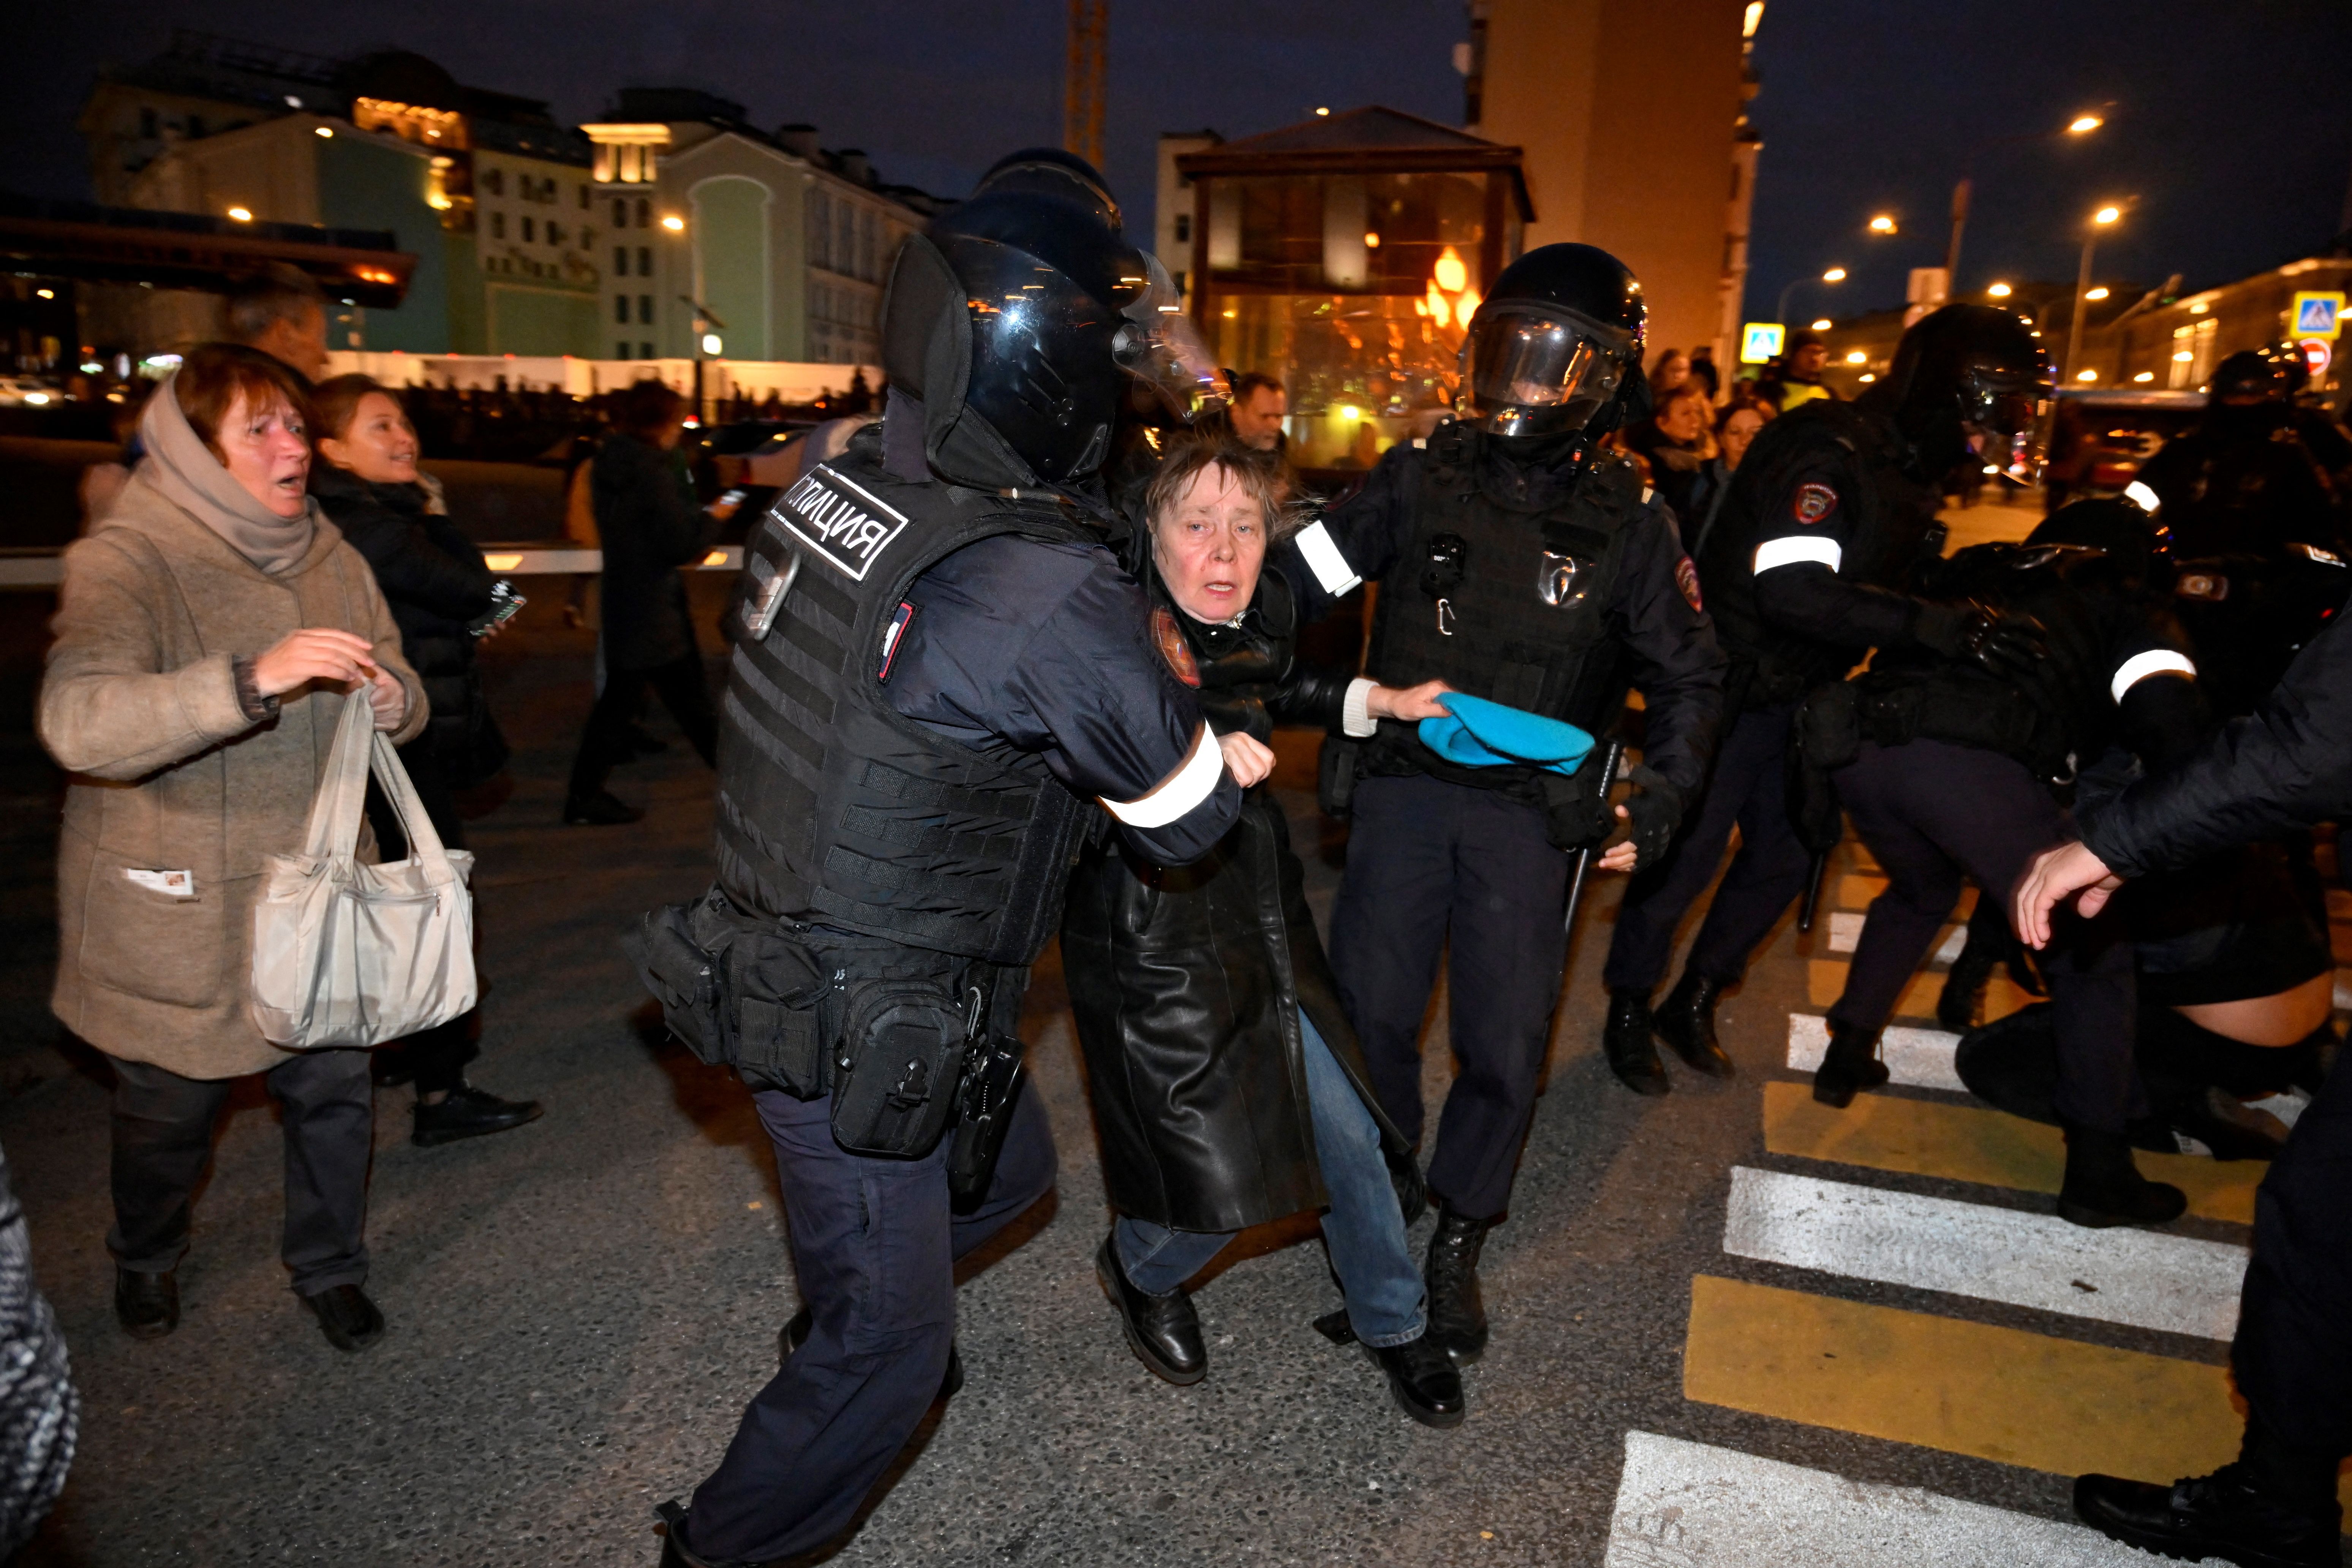 Police detaining a person in Moscow on Sept. 21.